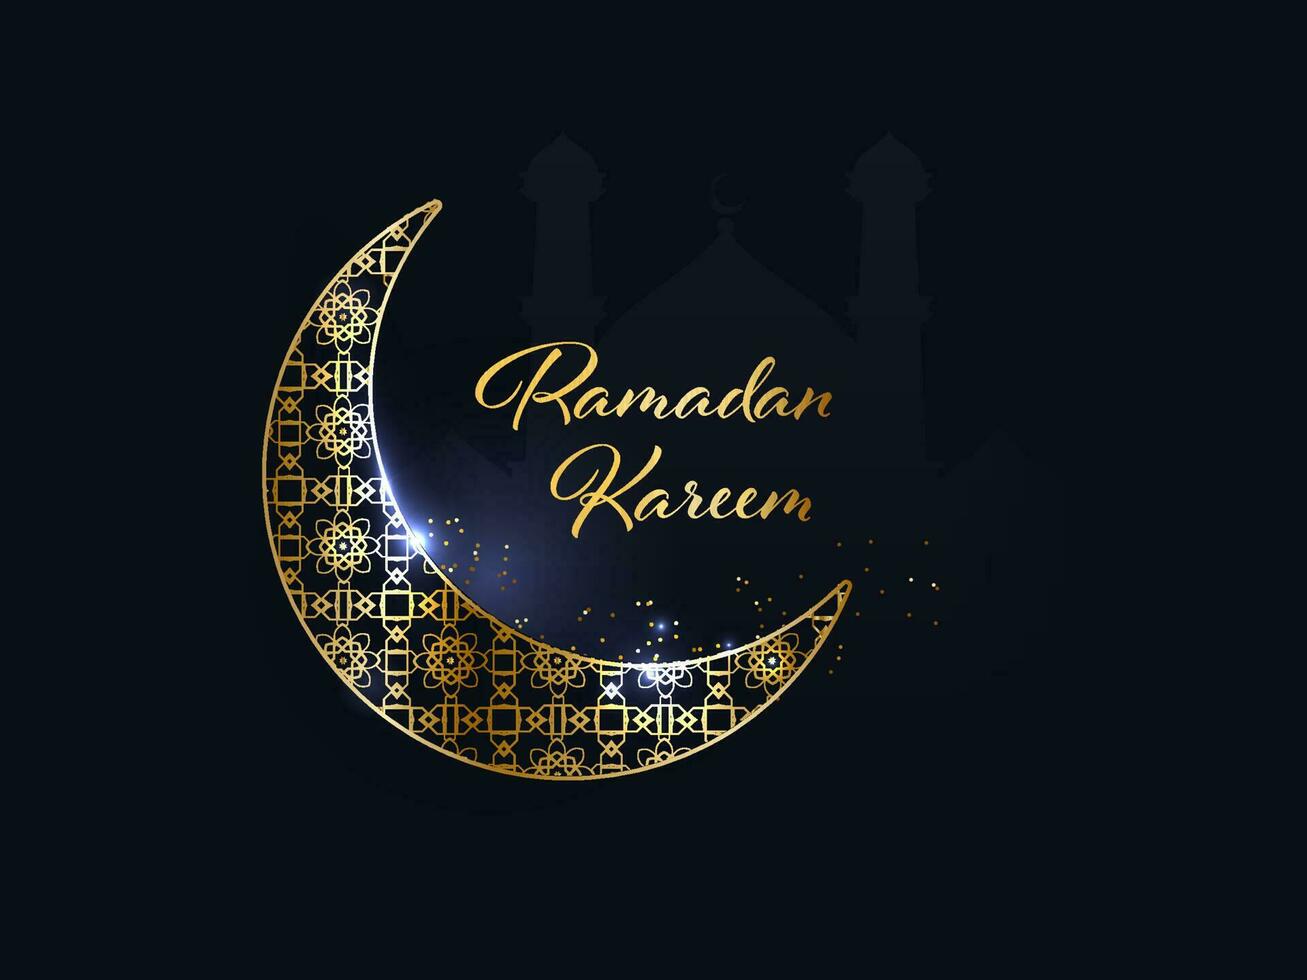 Golden Ramadan Kareem Font With Ornament Crescent Moon And Light Effect On Blue Silhouette Mosque Background. vector